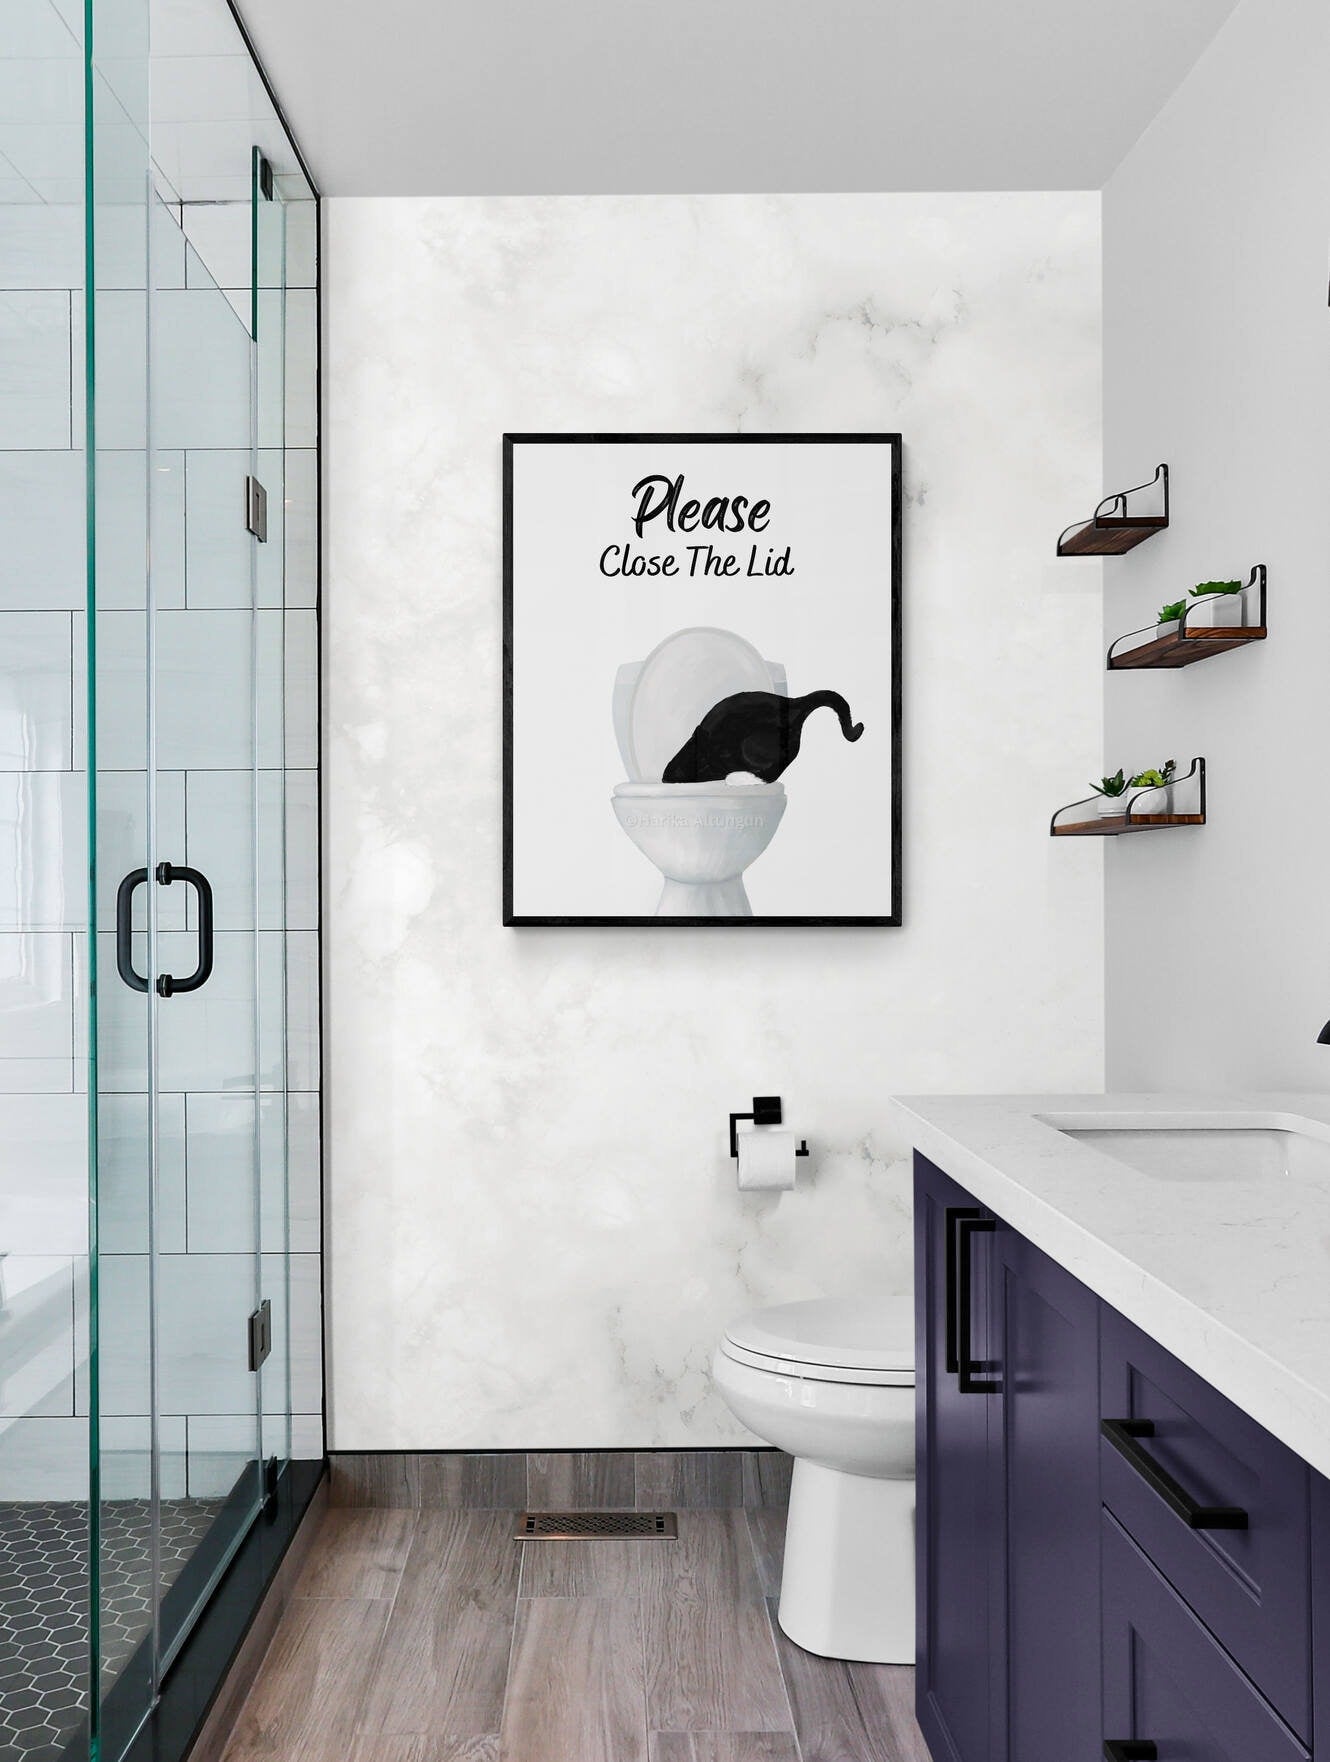 Tuxedo Cat Drinking Water From Toilet Sign, Cute Tuxedo Cat Print, Bathroom Decor, Cat Painting, Kitty Licking Water From Toilet Art